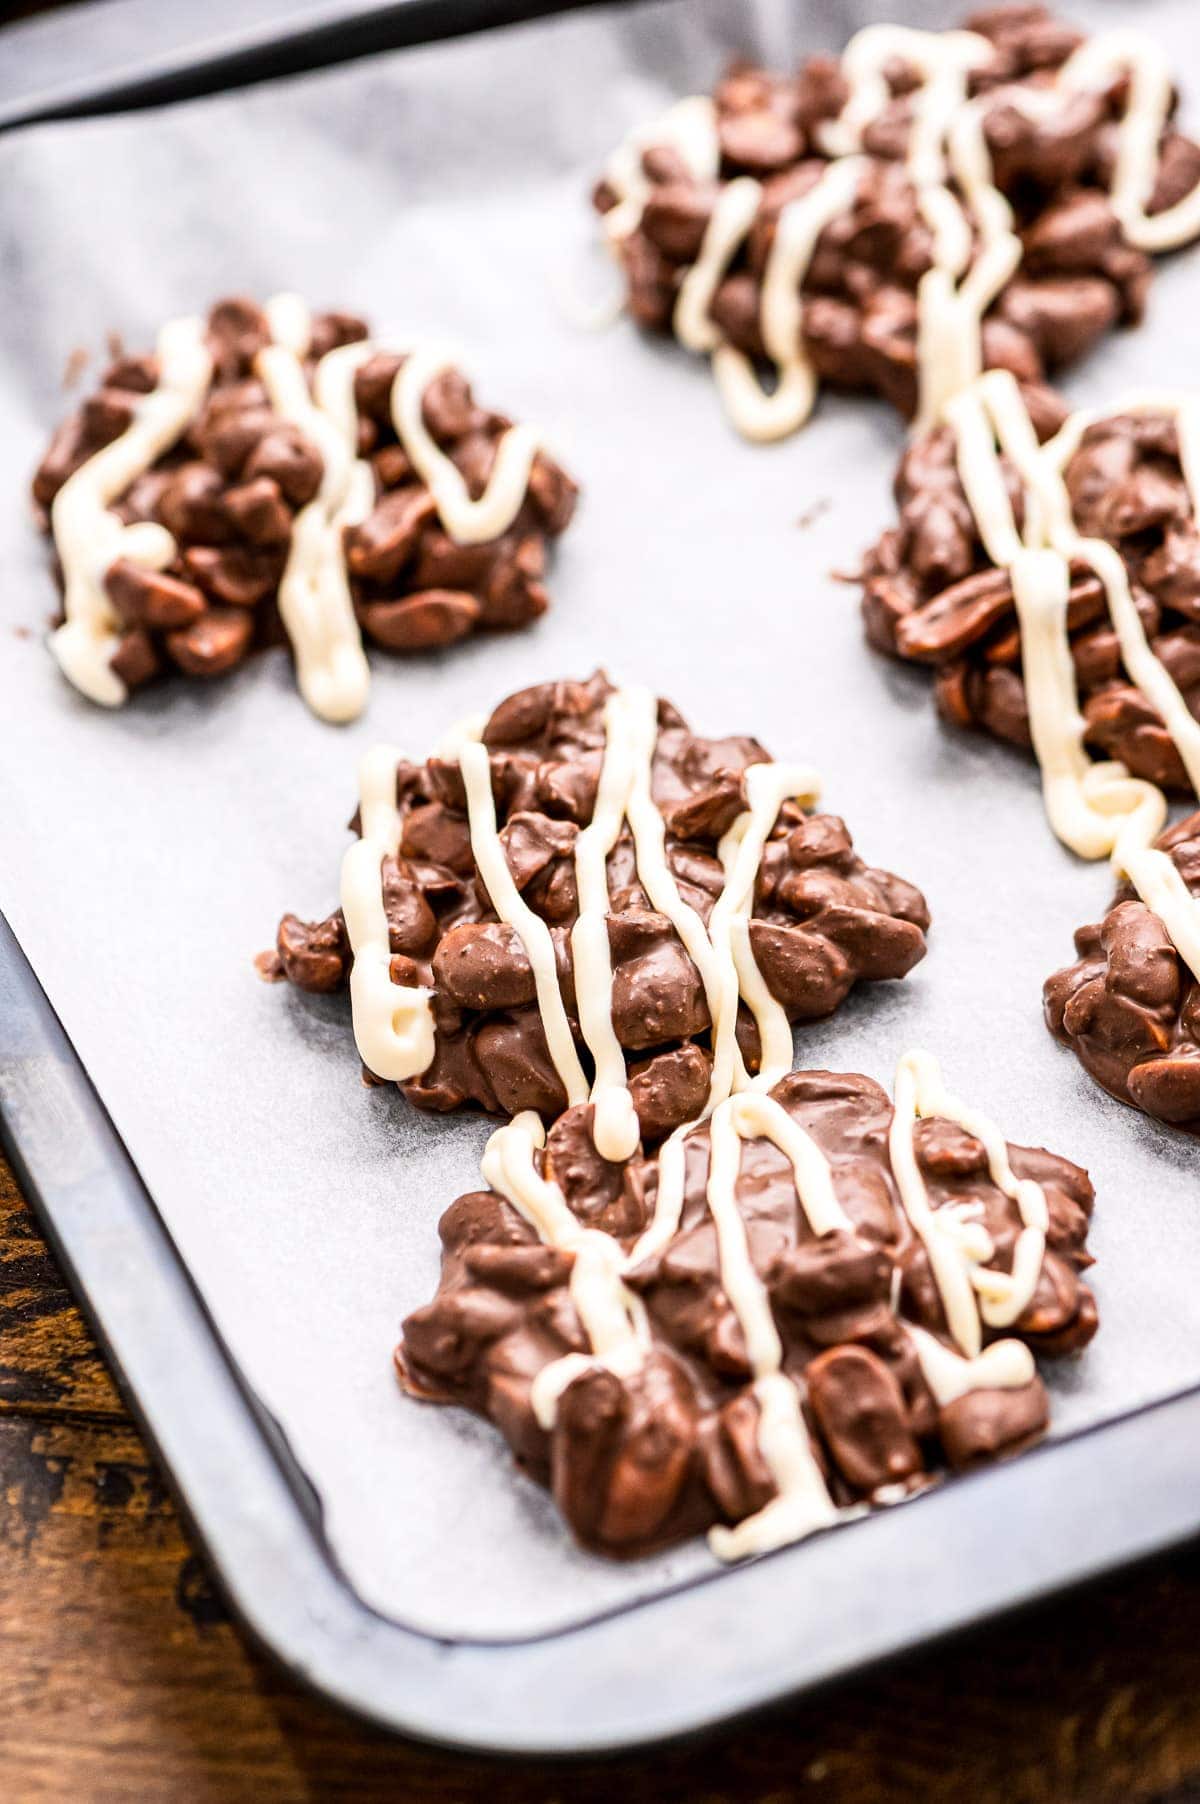 Crock Pot Chocolate Peanut Clusters topped with white chocolate on wax paper lined baking sheet